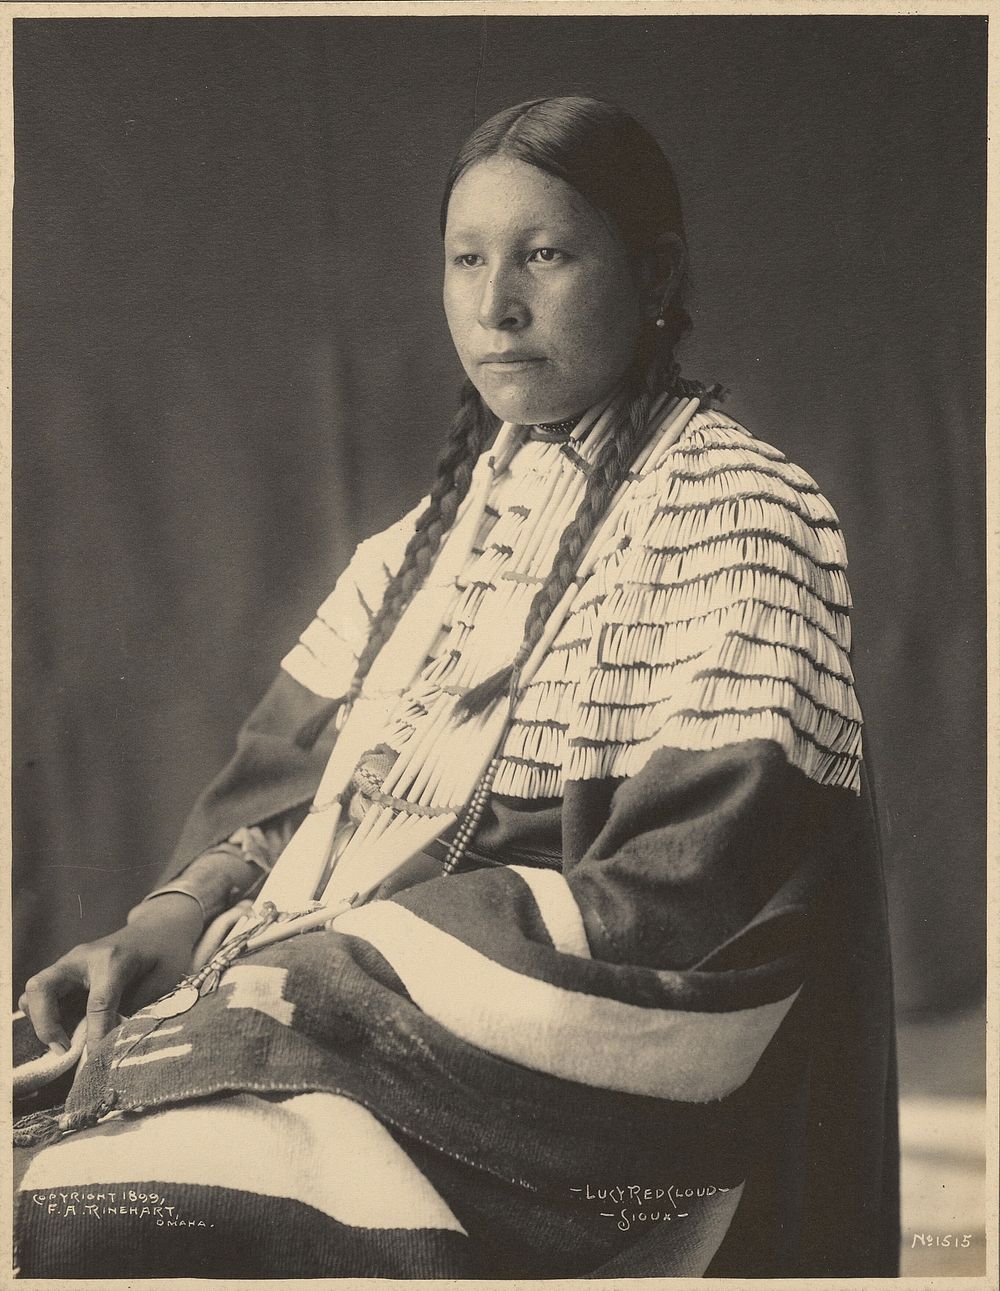 Lucy Red Cloud, Sioux by Adolph F Muhr and Frank A Rinehart